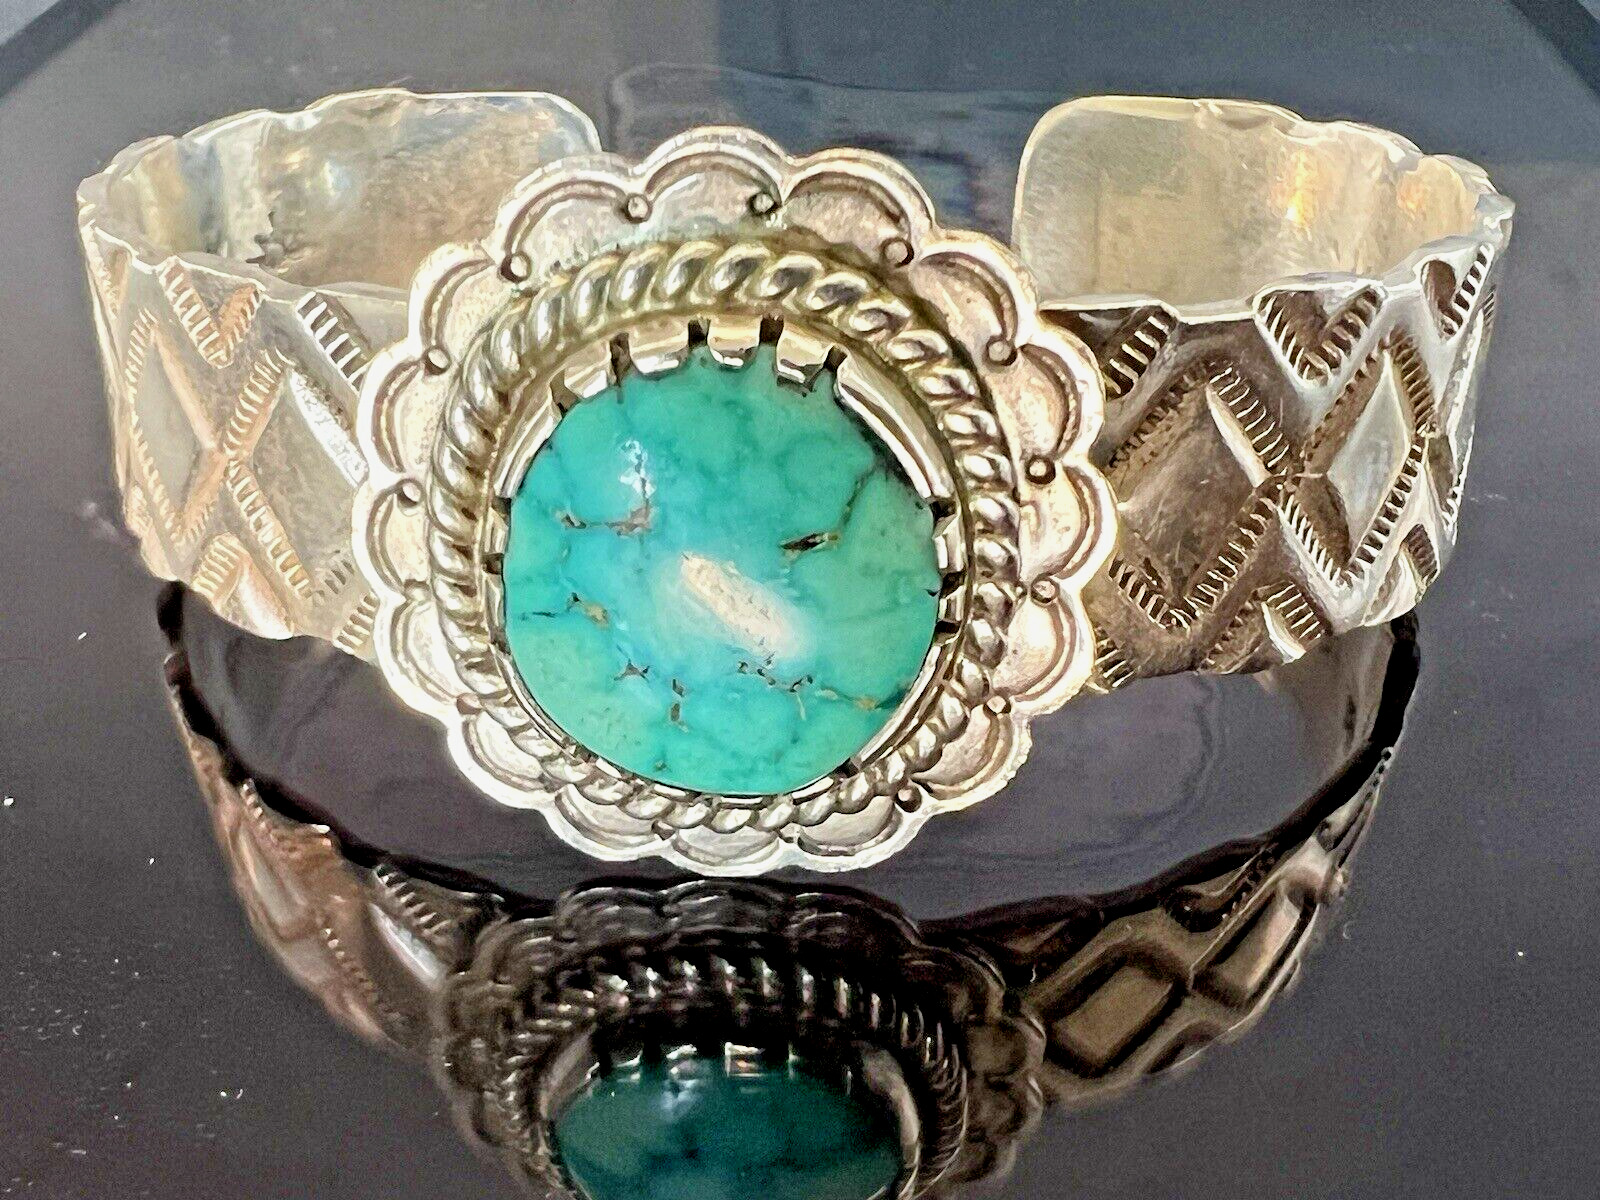 40g Old VTG YAZZIE Navajo Sterling Silver Turquoise Cabochon Cuff Bracelet